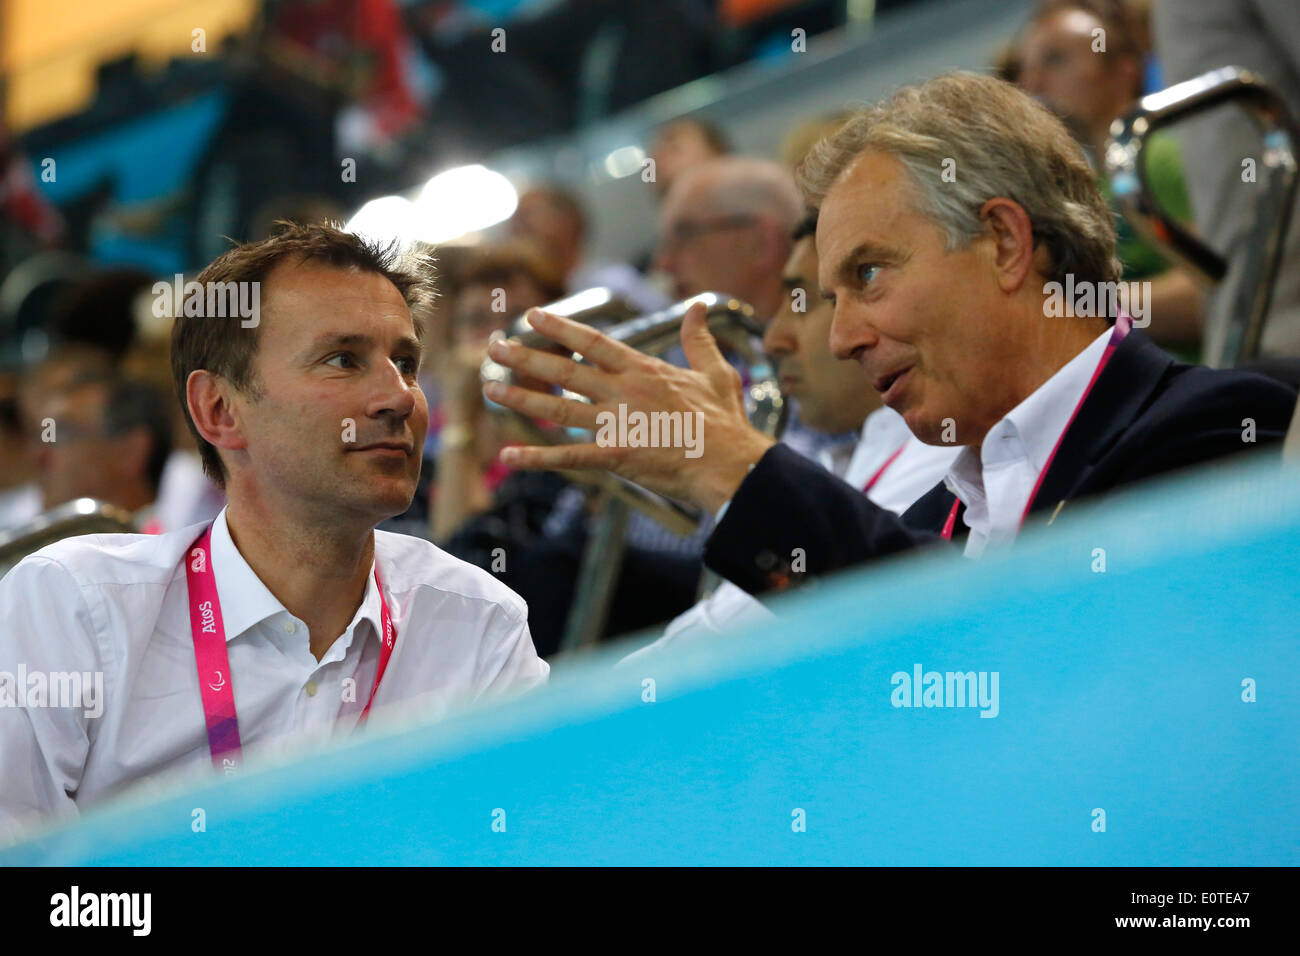 Britain's new Health Secretary Jeremy Hunt (L) and Former Prime Minister, Tony Blair (R) attend the swimming session competition held at the Aquatics Center during the London 2012 Paralympic Games in London, Britain, 07 September 2012. Stock Photo